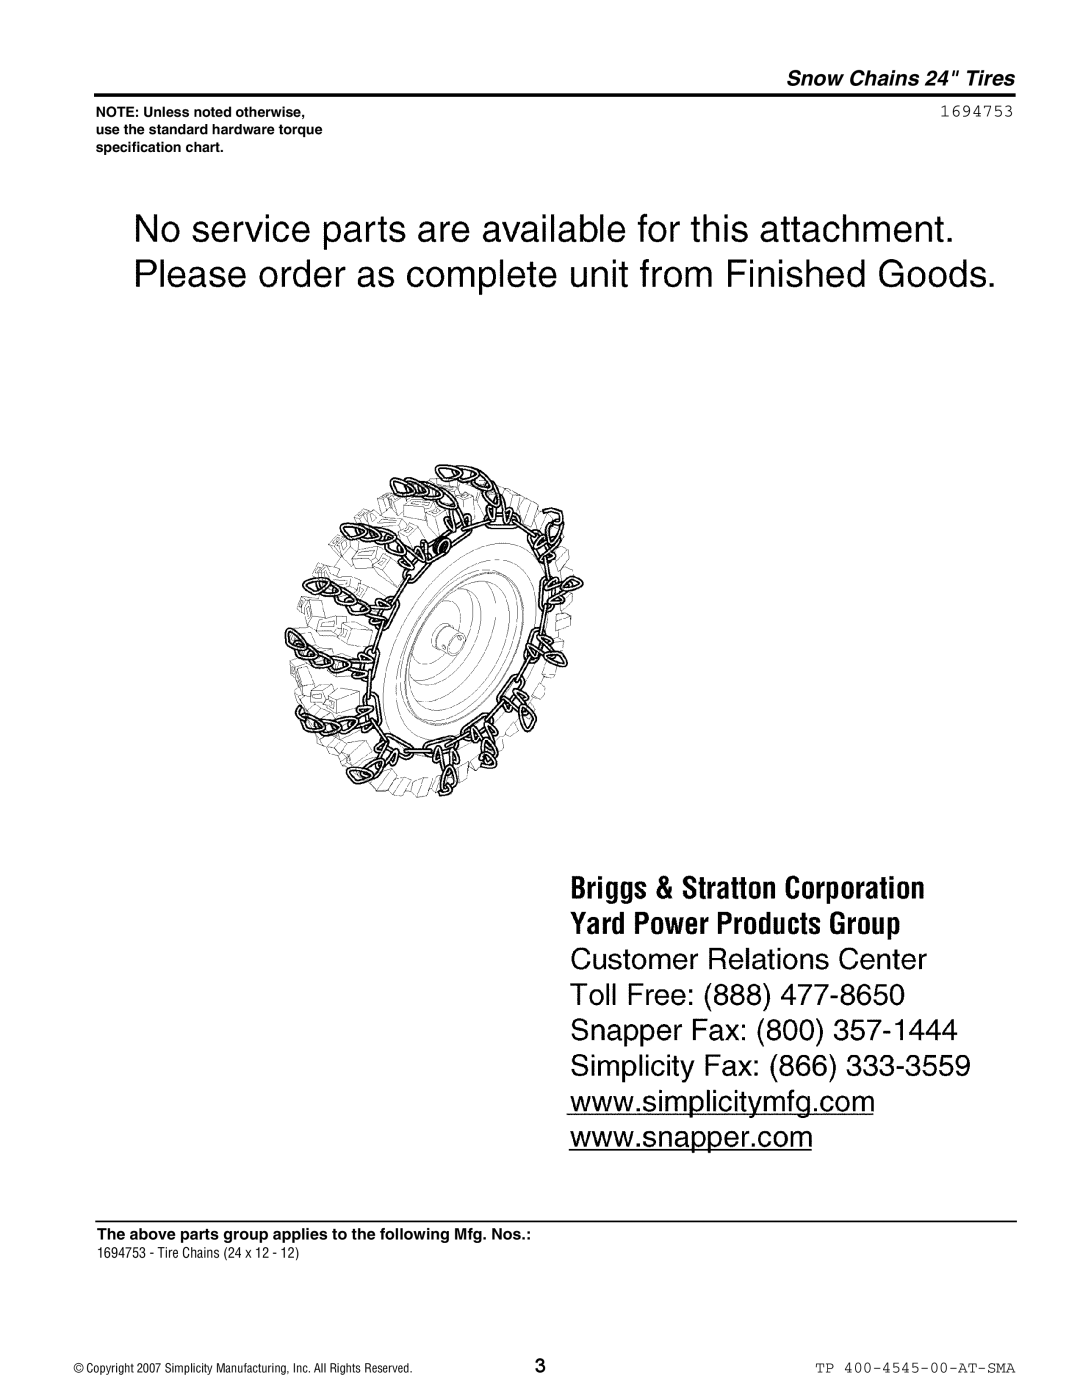 Snapper 4545 Snow Chains 24 Tires, NOTE Unless noted otherwise, use the standard hardware torque, specification chart 